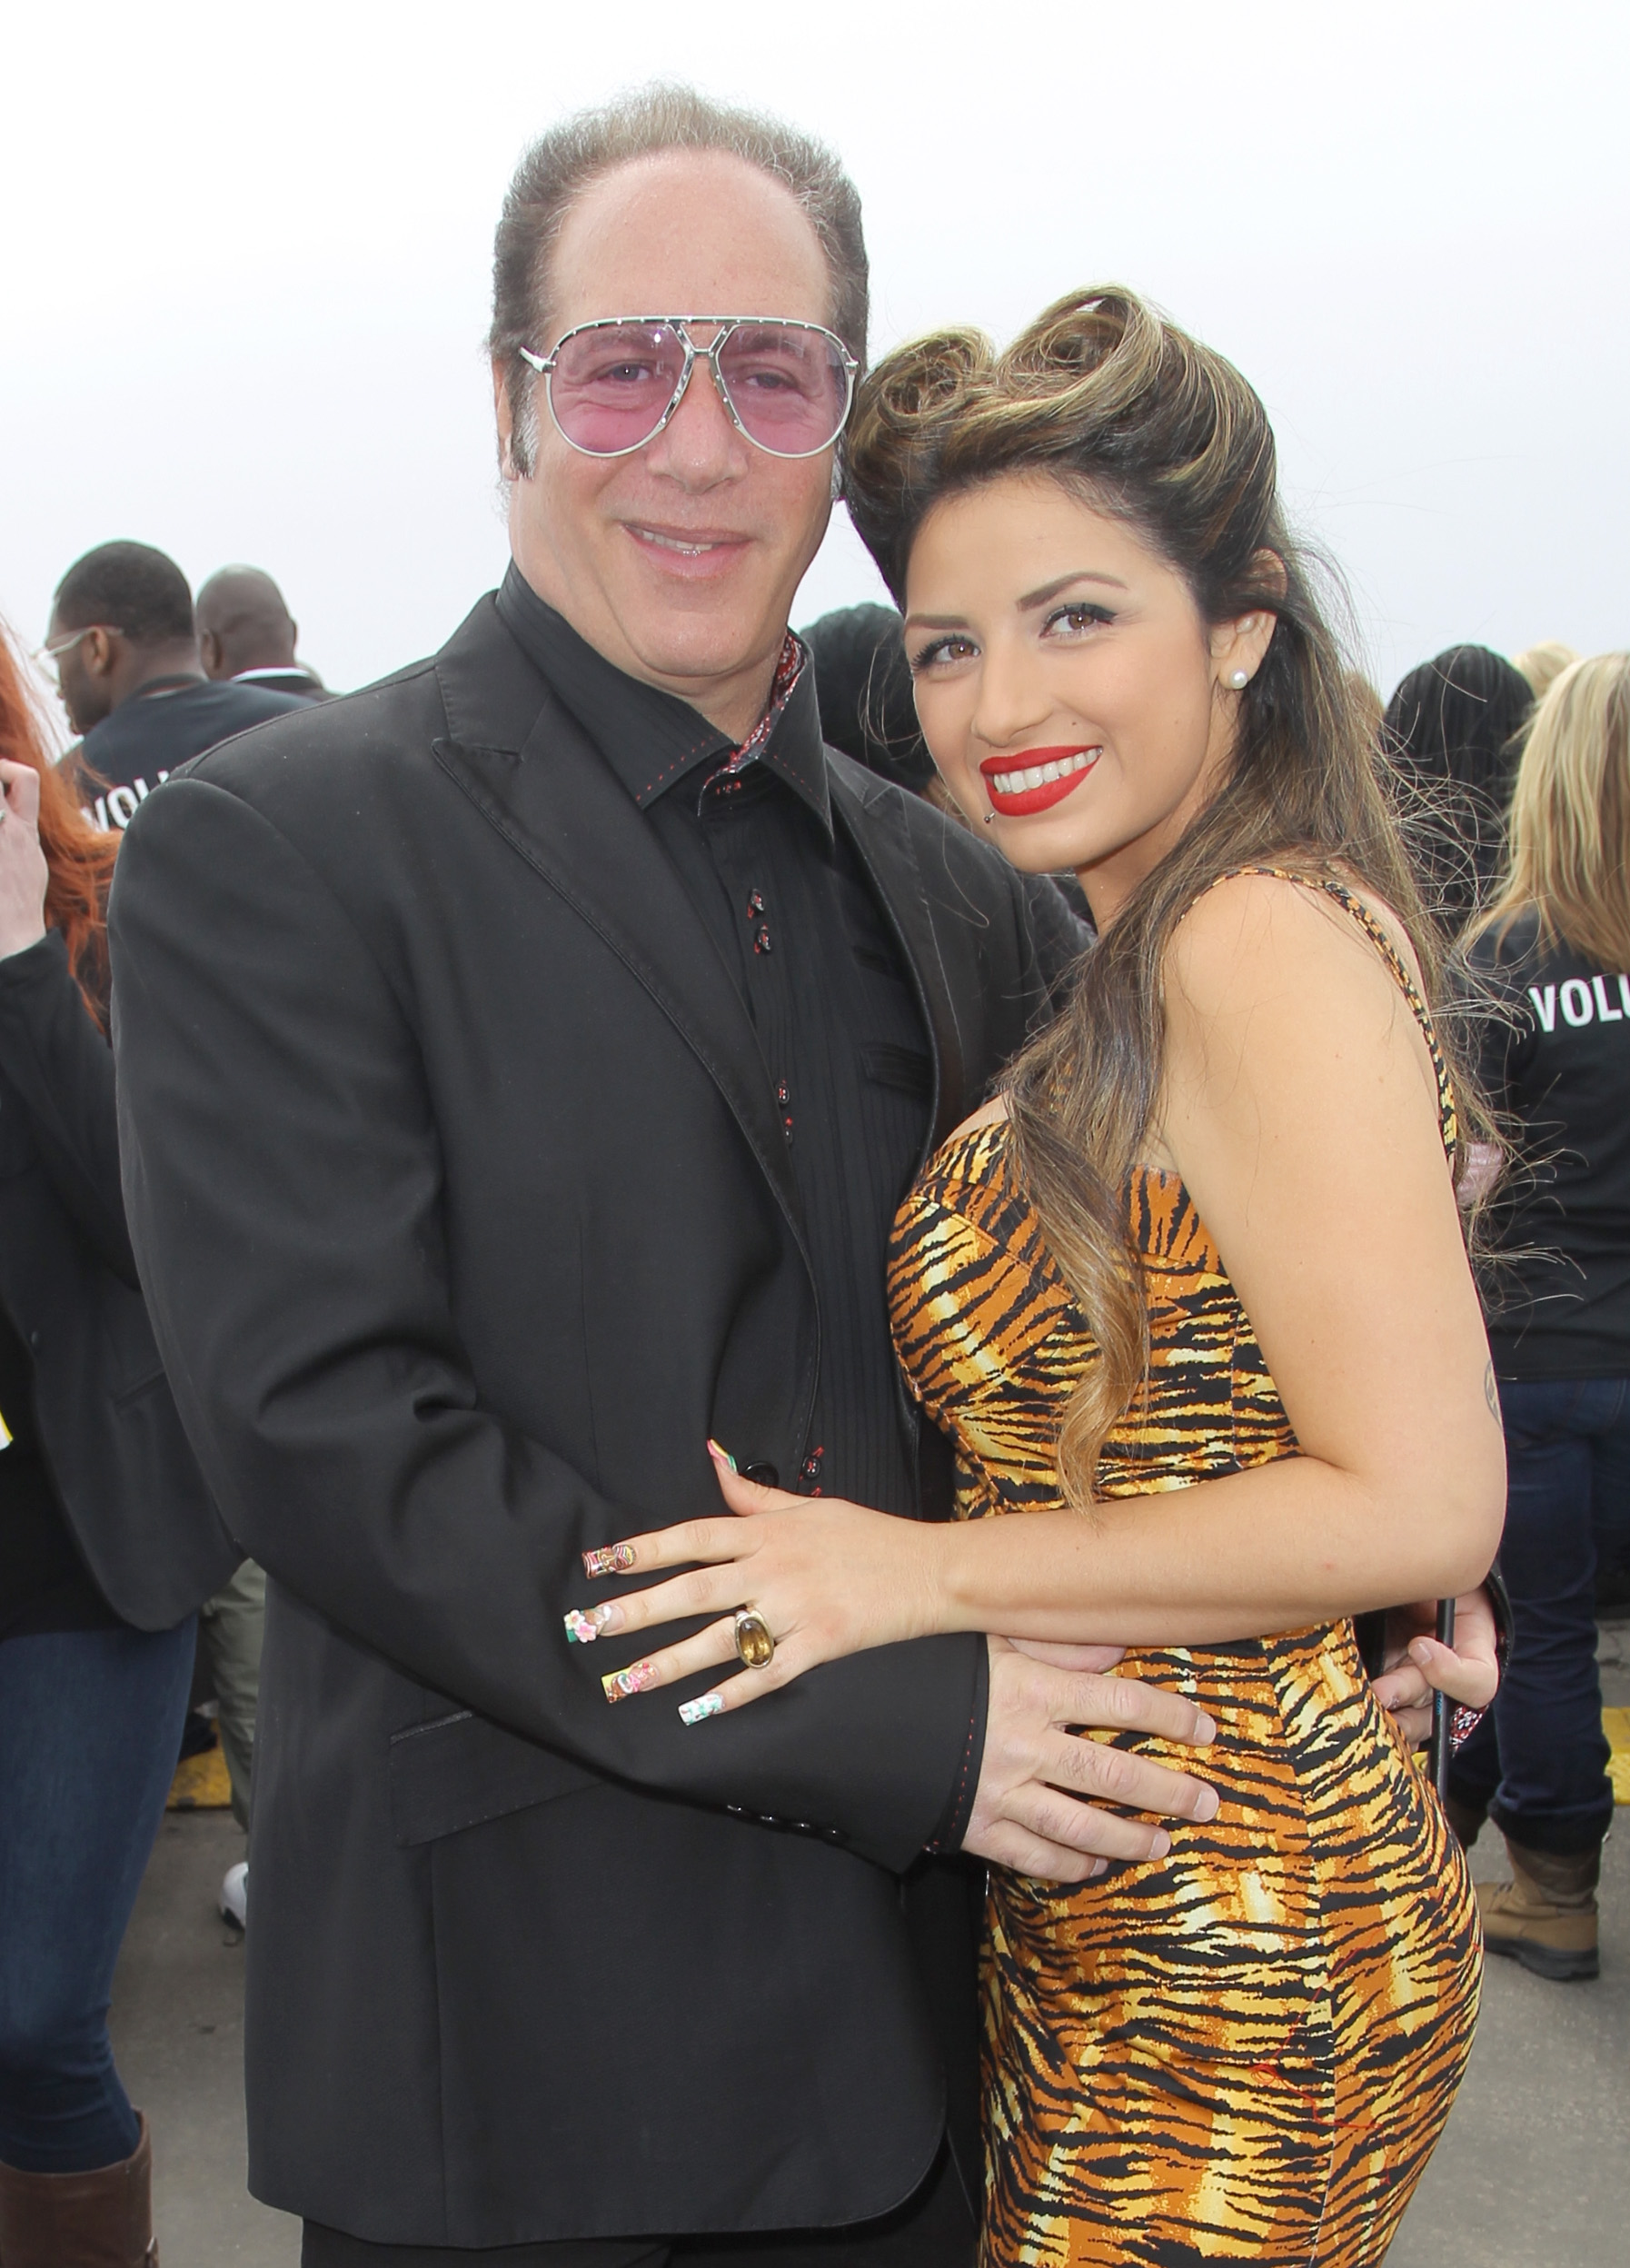 Andrew Dice Clay and Valerie Vasquez at the 2014 Film Independent Spirit Awards on March 1, 2014, in Santa Monica, California. | Source: Getty Images